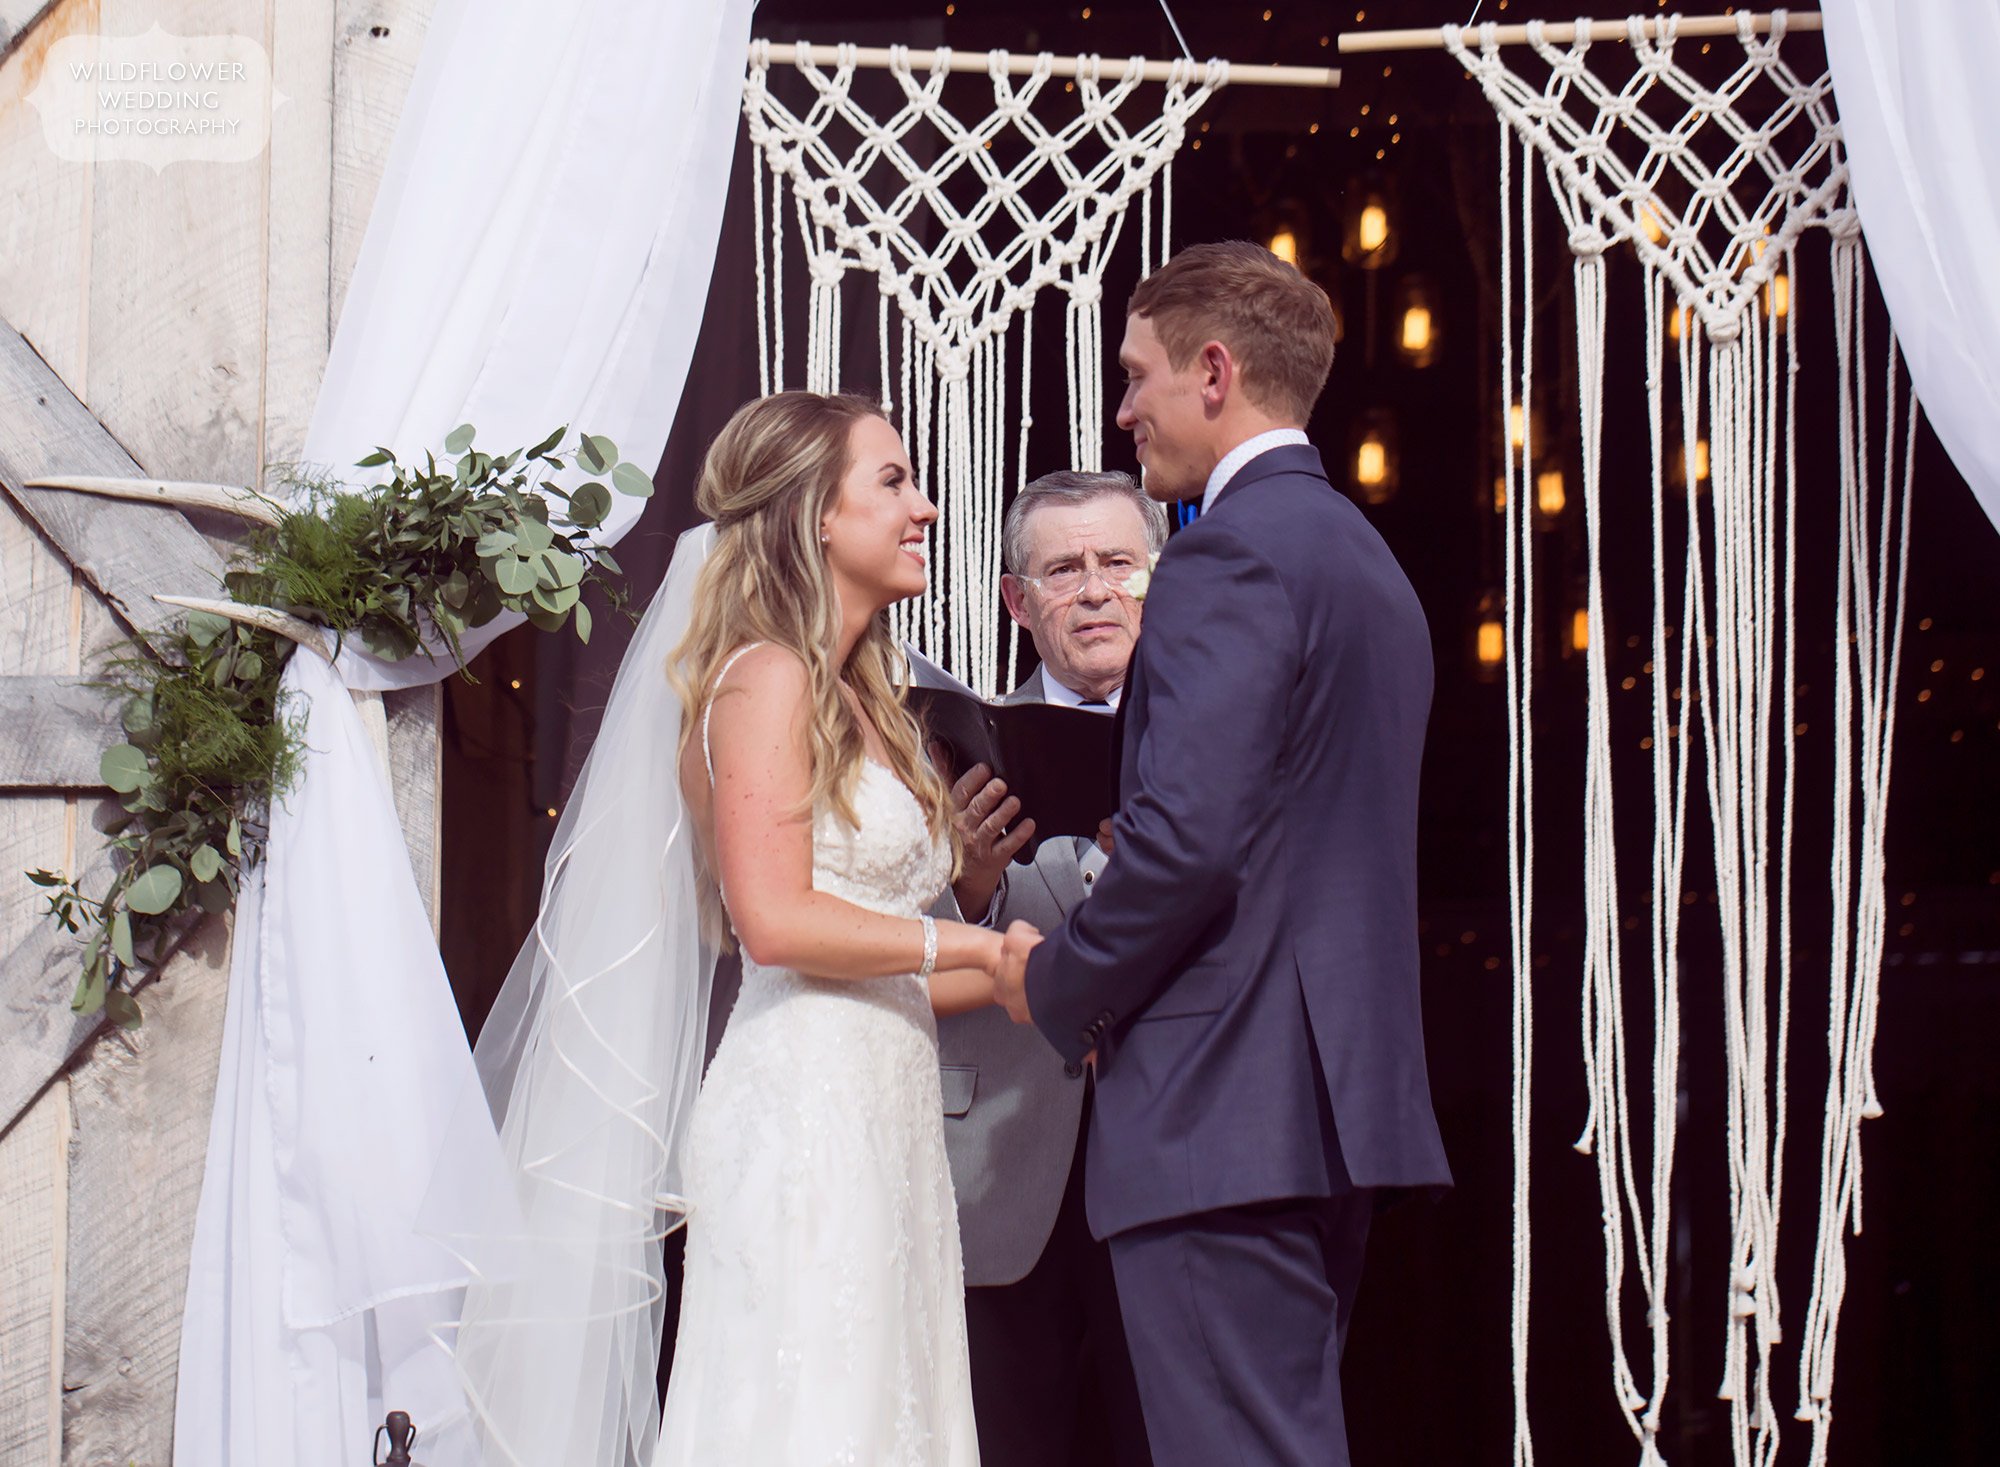 The bride and groom exchange vows in front of this white woven macrame backdrop in the barn doorway at Kempker's Back 40.